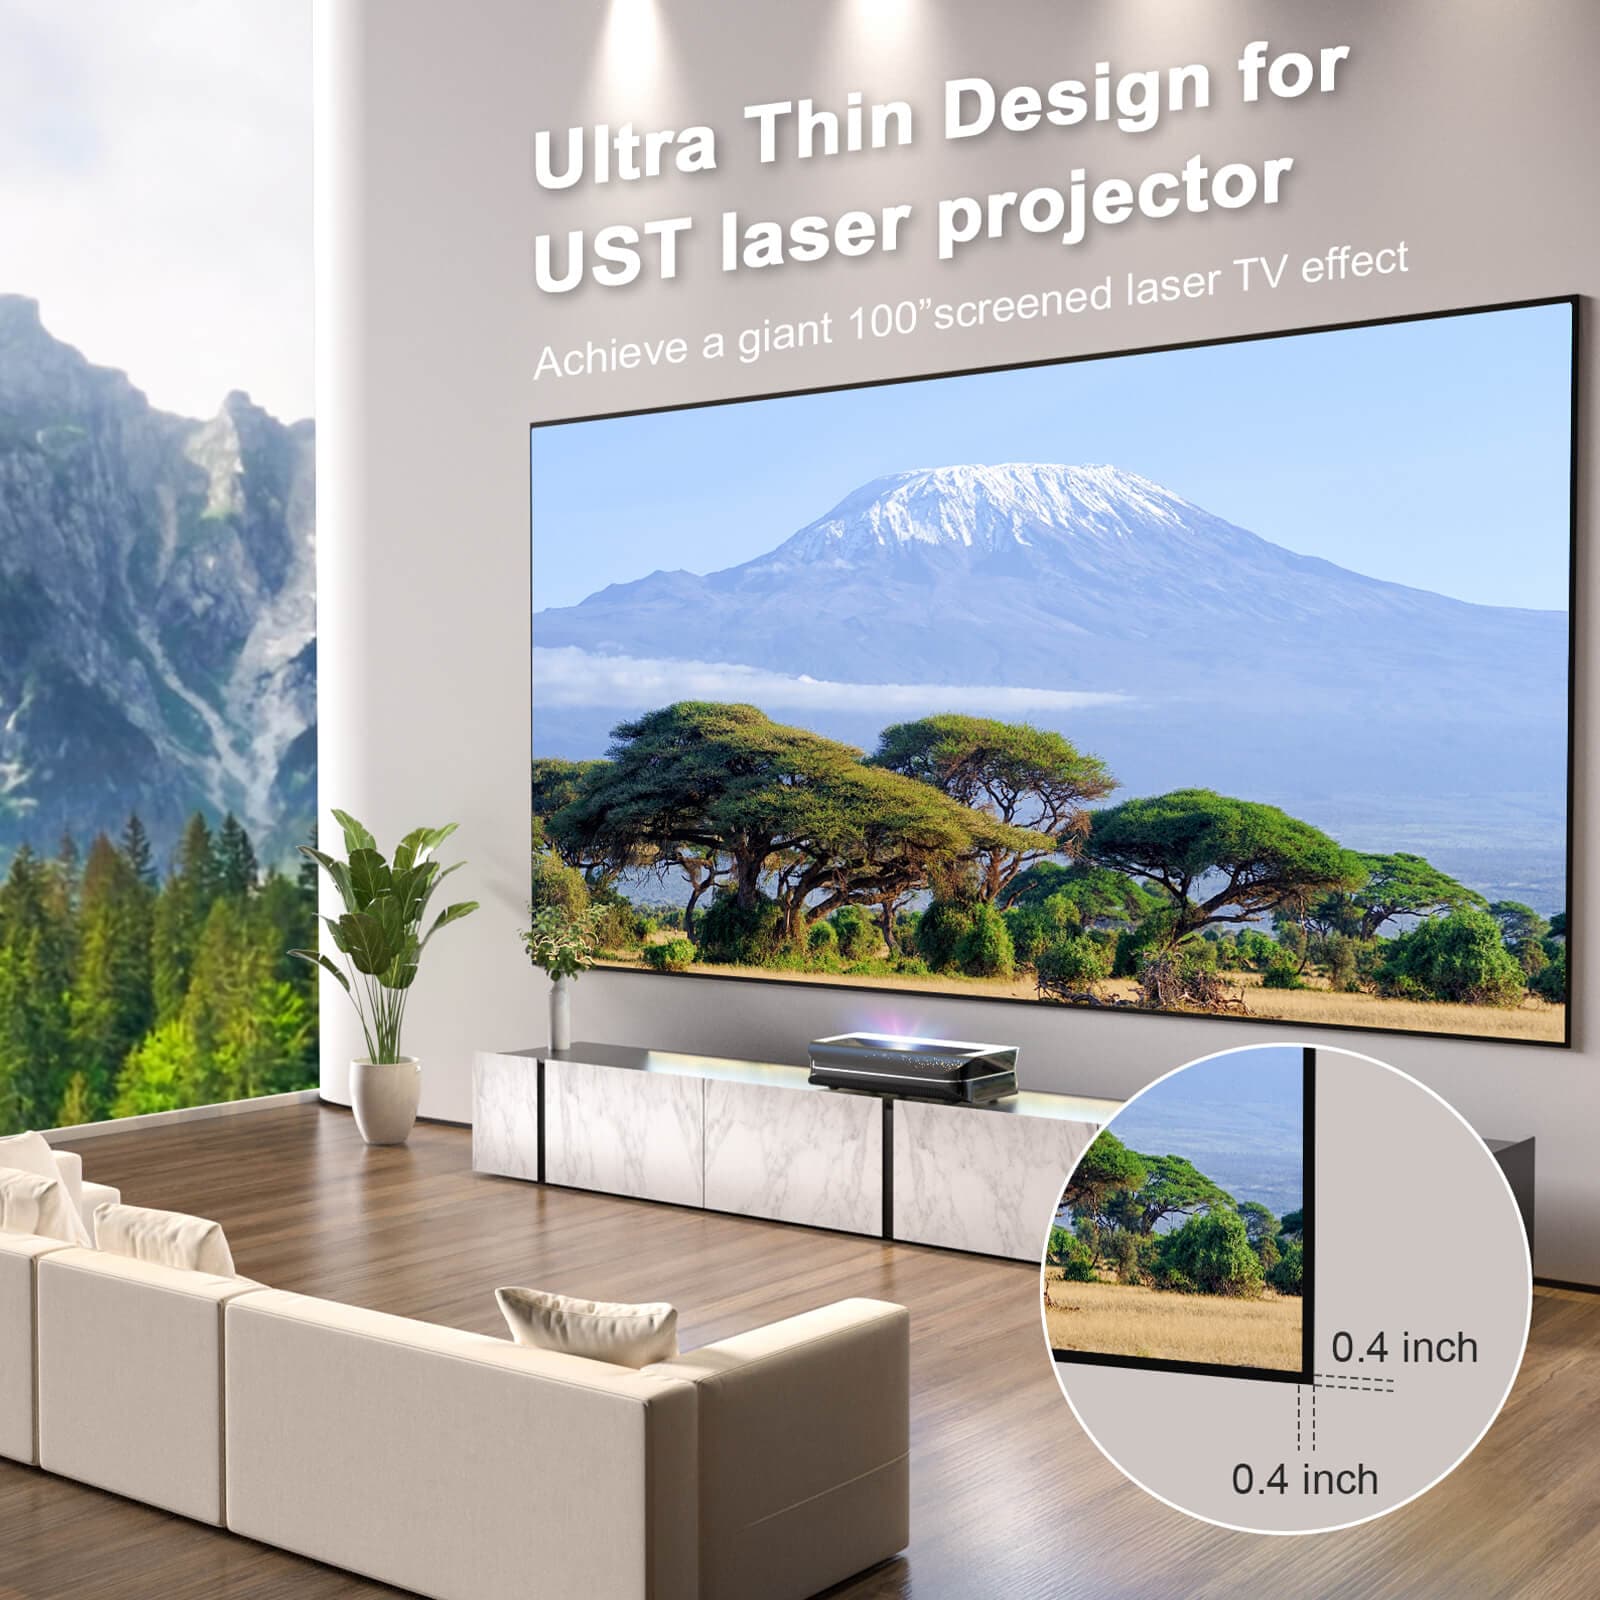 Ultra-thin-design-for-UST-laser-projector